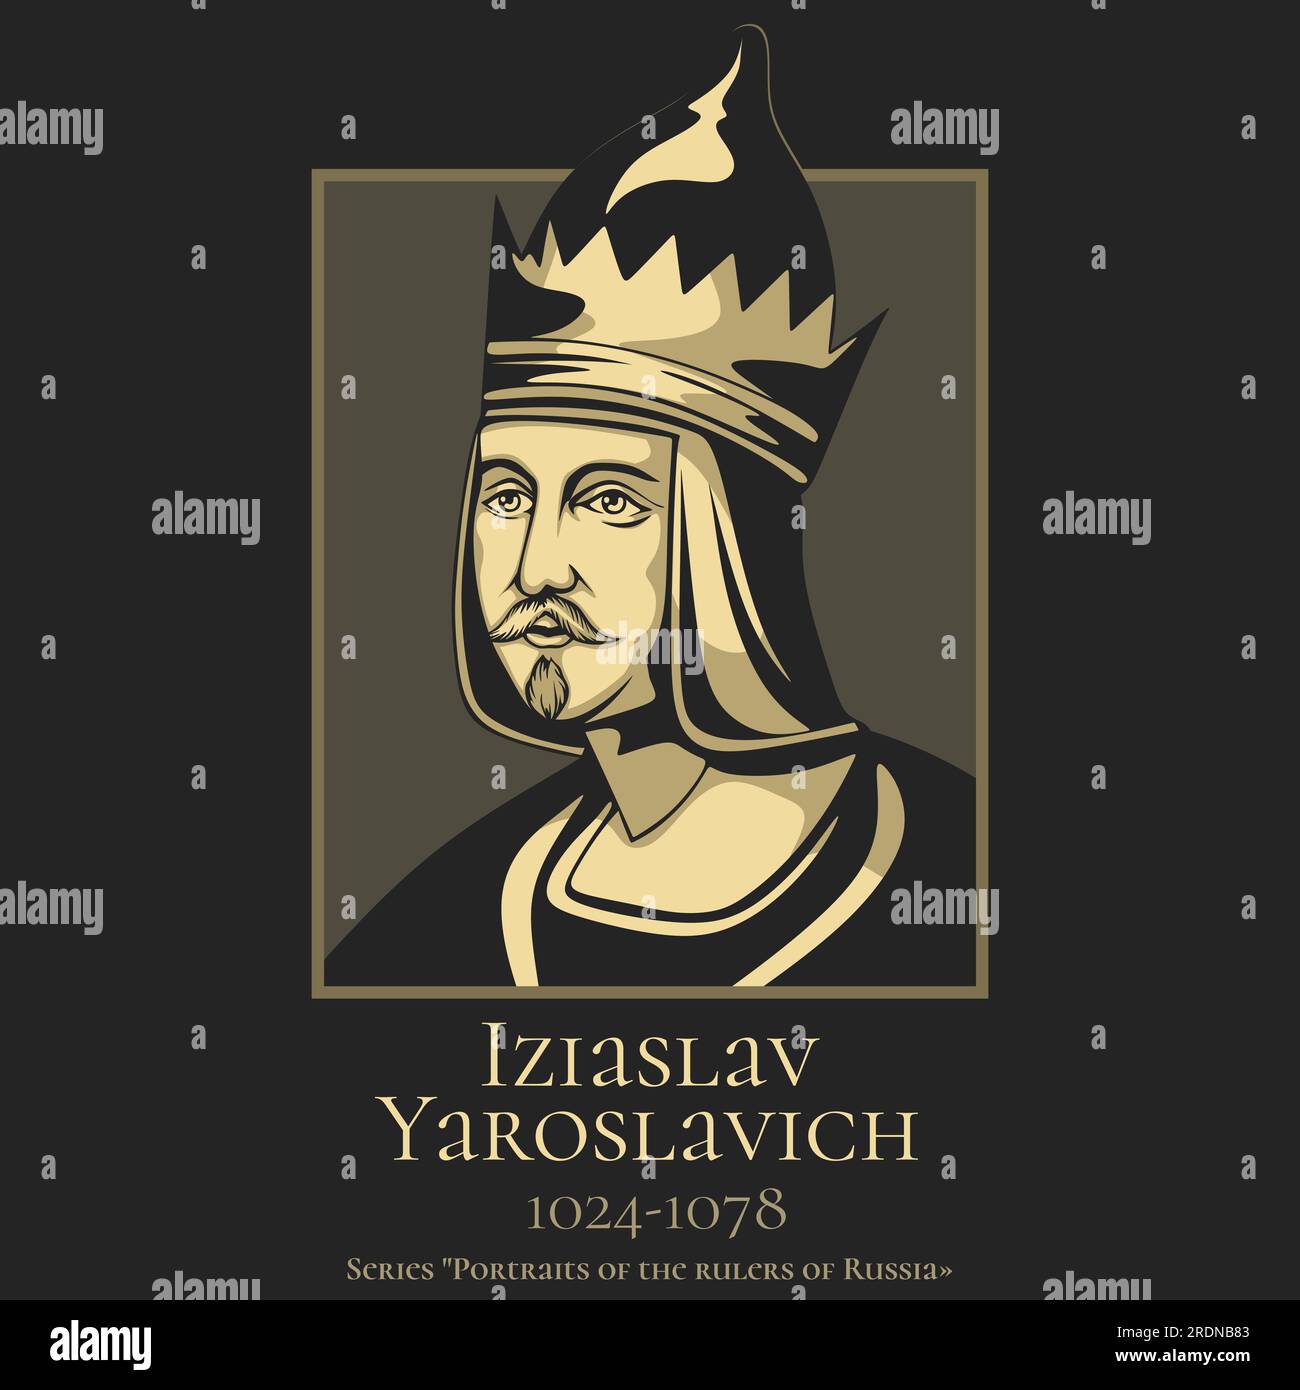 Portrait of the rulers of Russia. Iziaslav Yaroslavich (1024-1078) was a Kniaz of Turov and Grand Prince of Kiev from 1054. Stock Vector